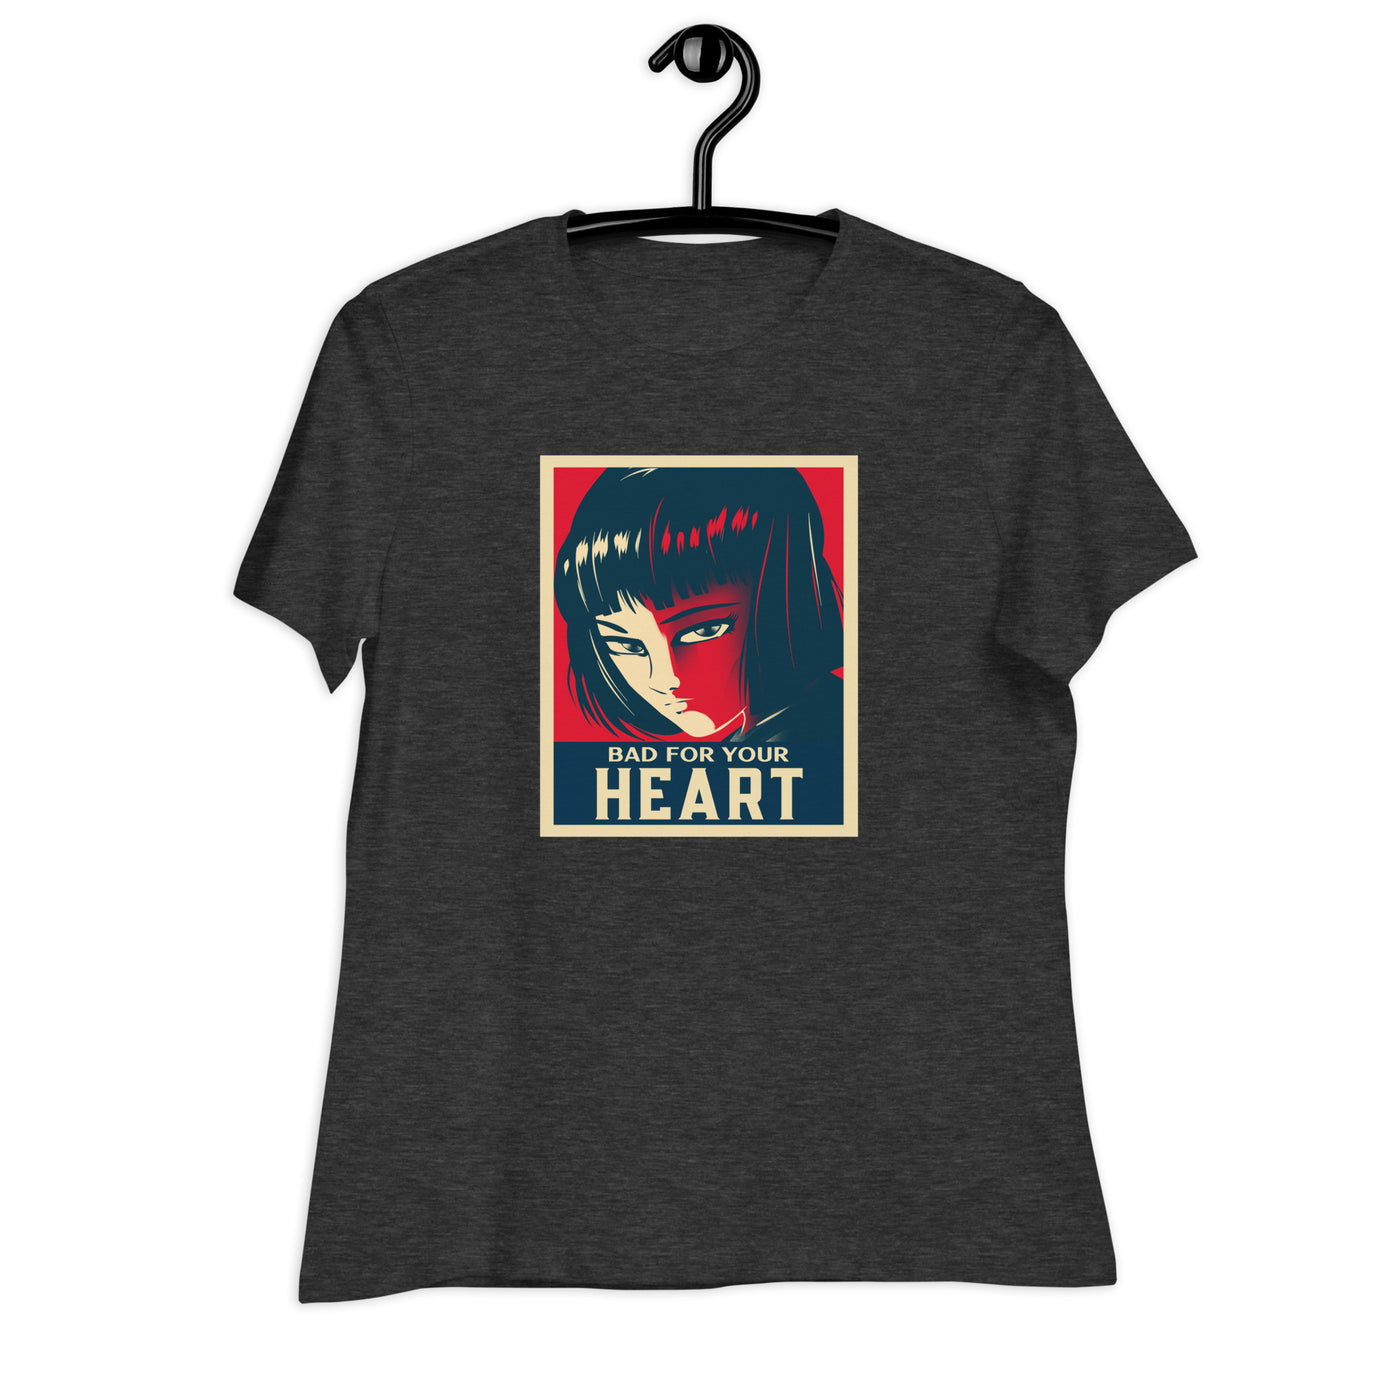 Bad for Your Heart Women's T-Shirt